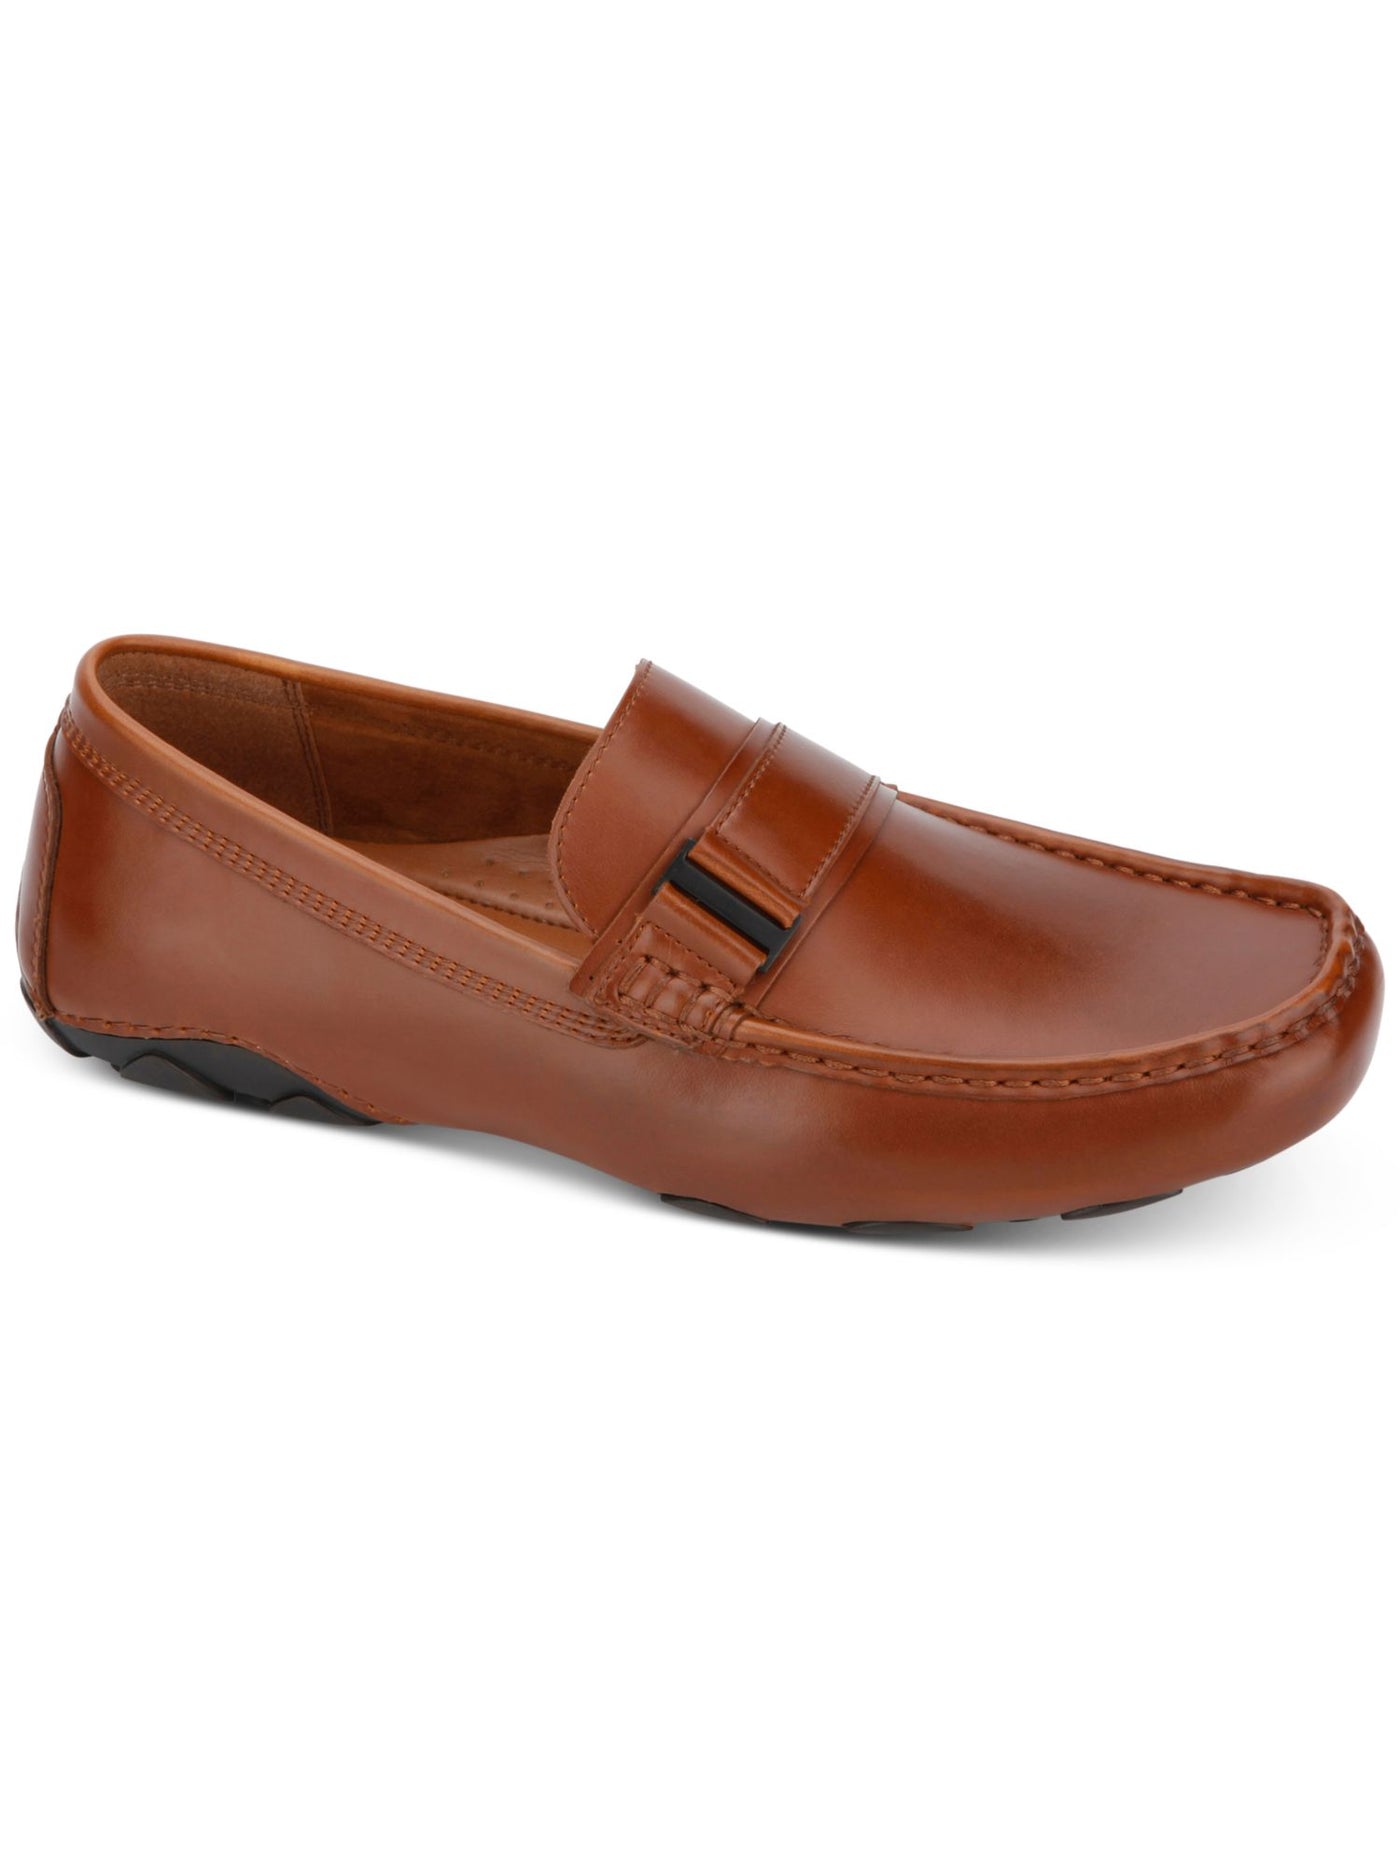 UNLISTED by KENNETH COLE Mens Brown Moc Toe Decorative Strap Padded Comfort String Driver Square Toe Slip On Loafers Shoes 9.5 M